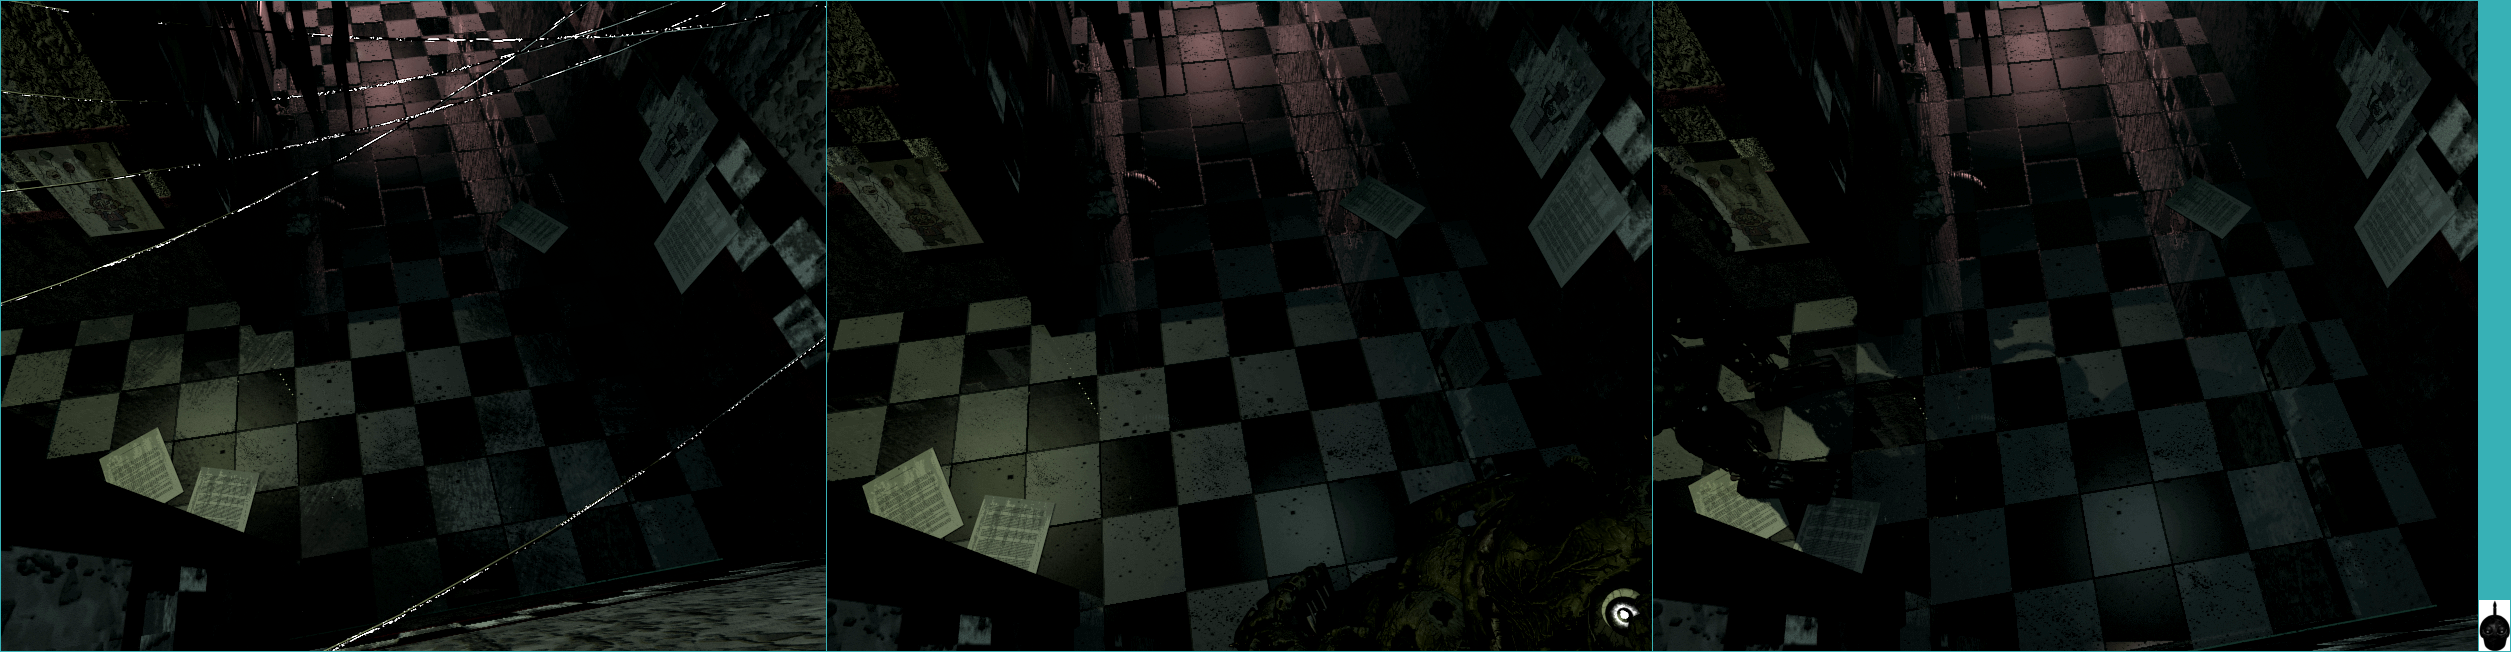 Five Nights at Freddy's 3 - Room 03